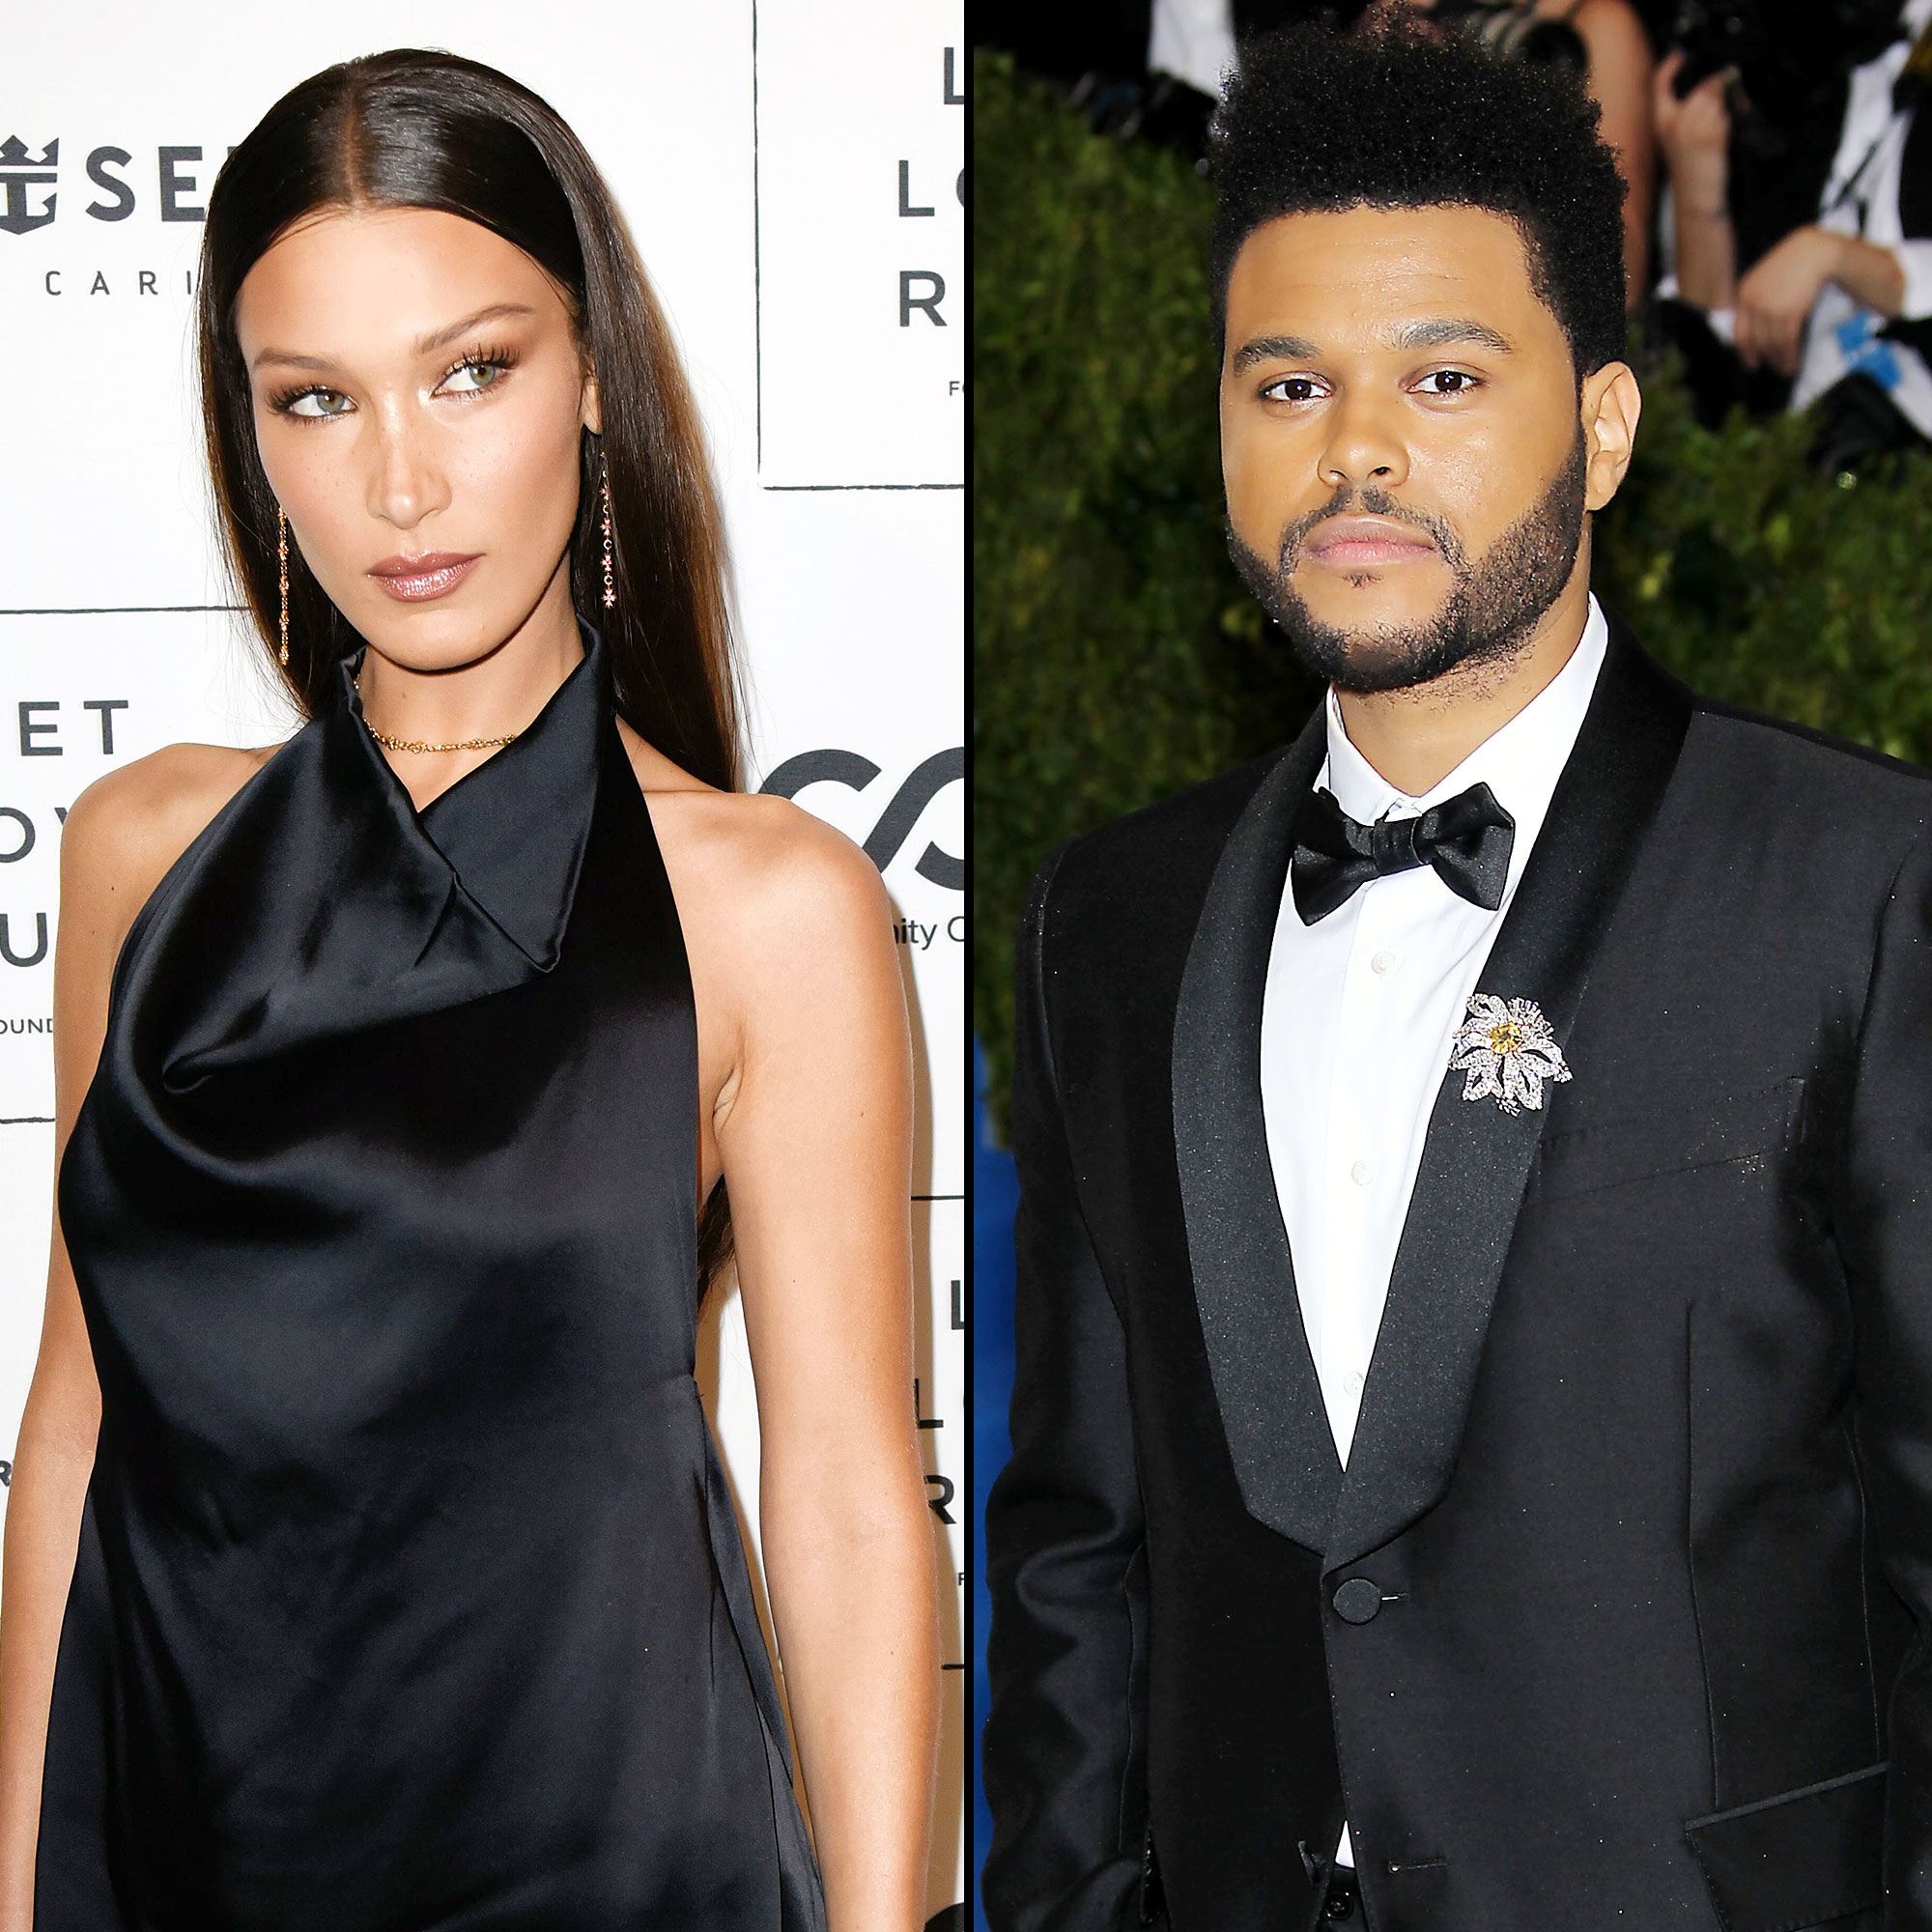 Who is the weeknd dating